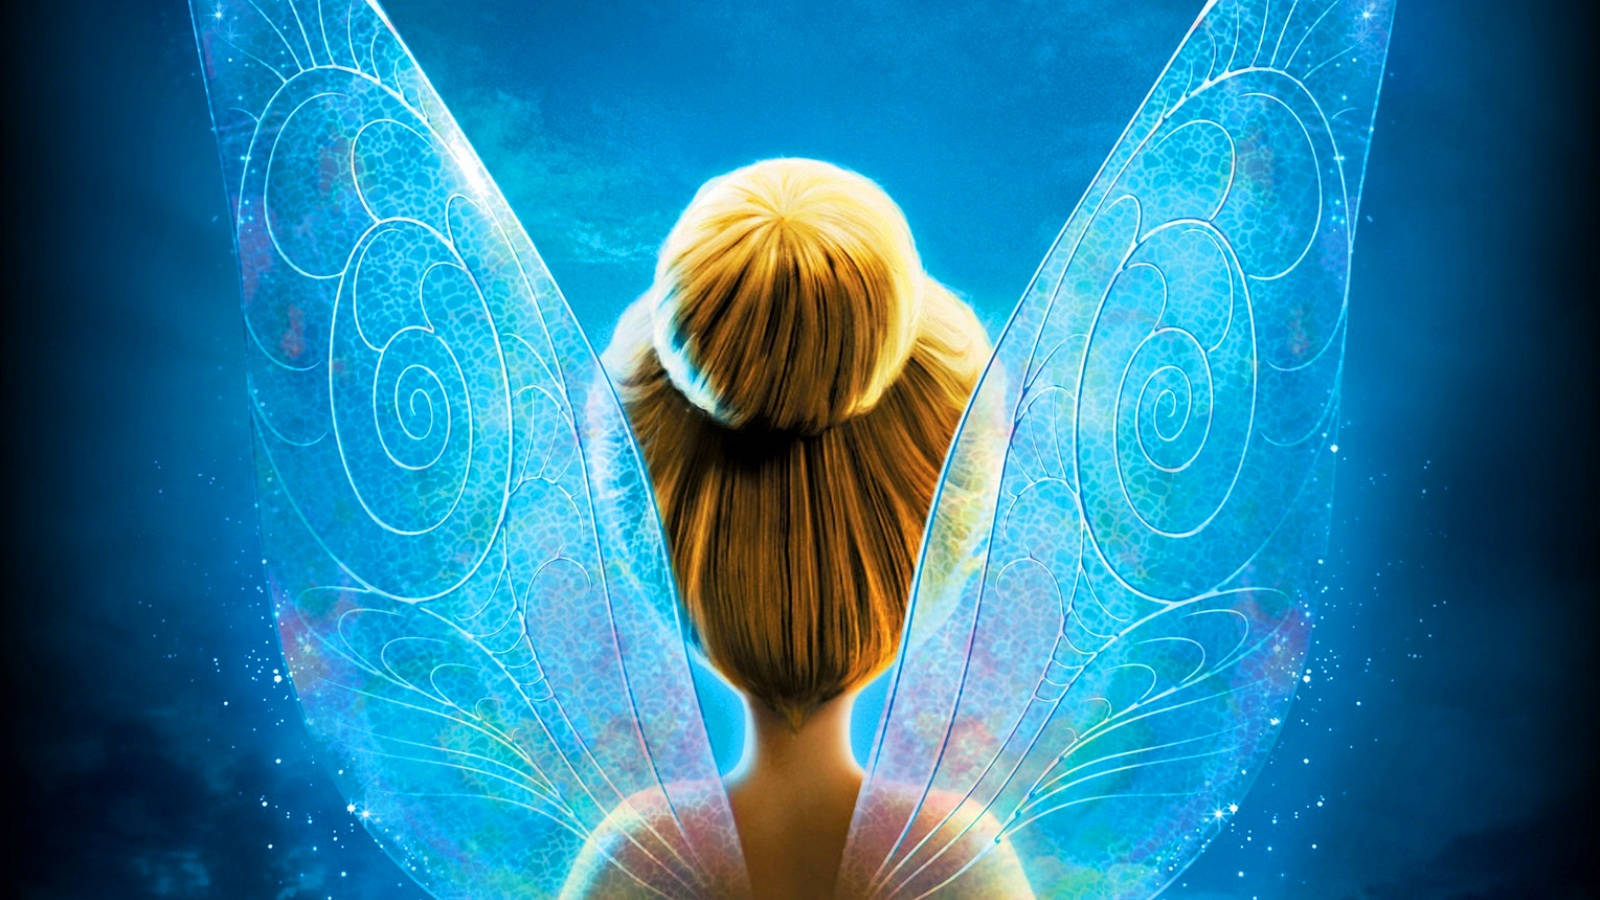 Free Tinker Bell Wallpaper Downloads, [100+] Tinker Bell Wallpapers for  FREE 